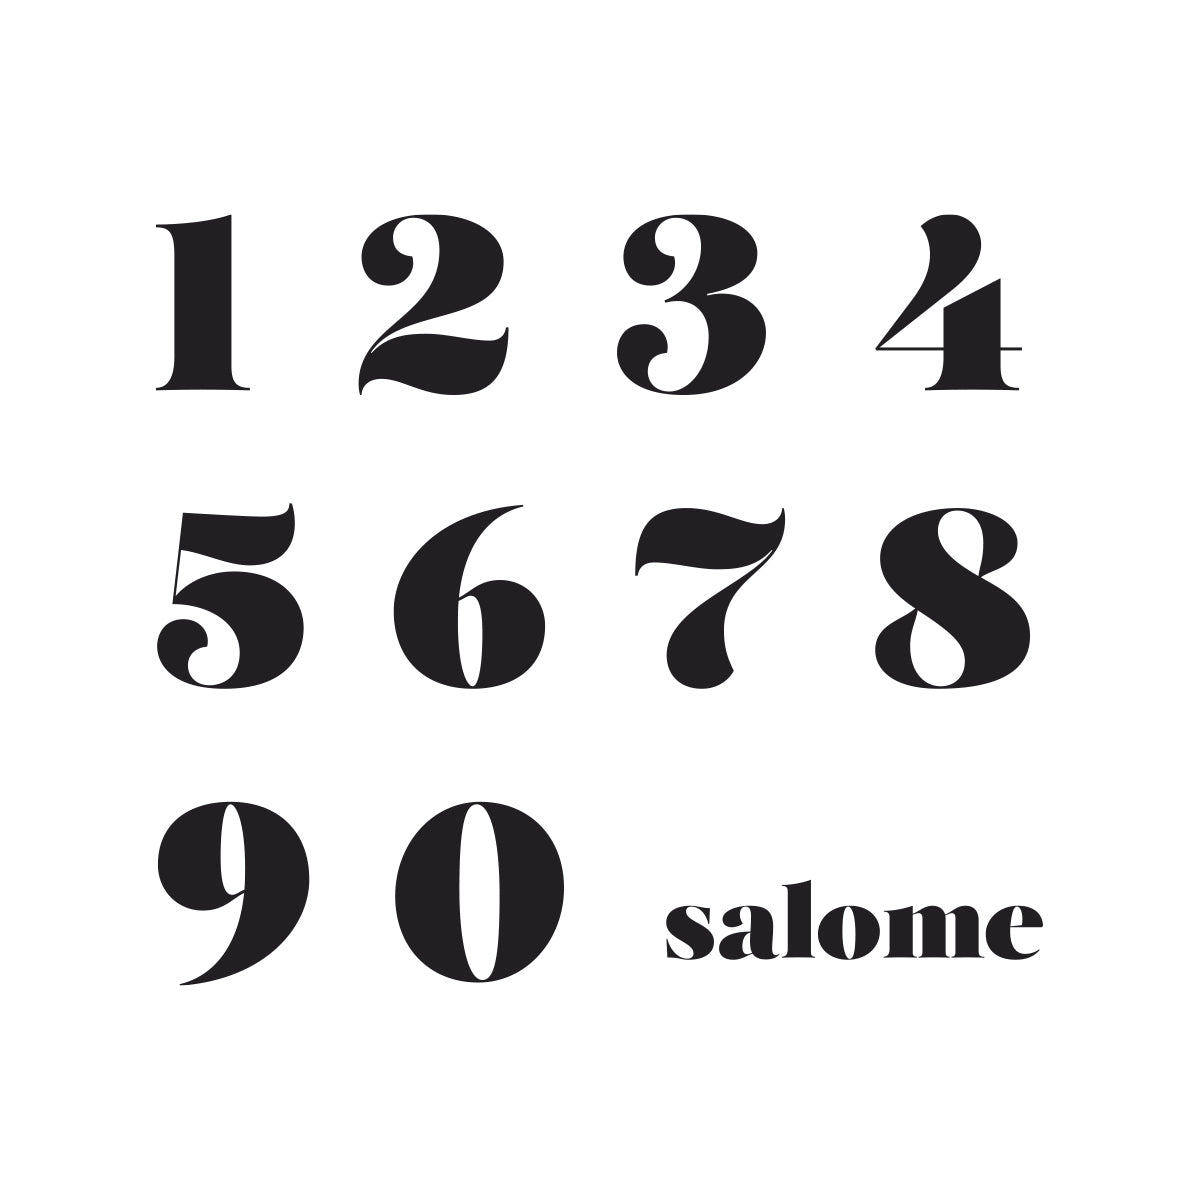 Salome Number.